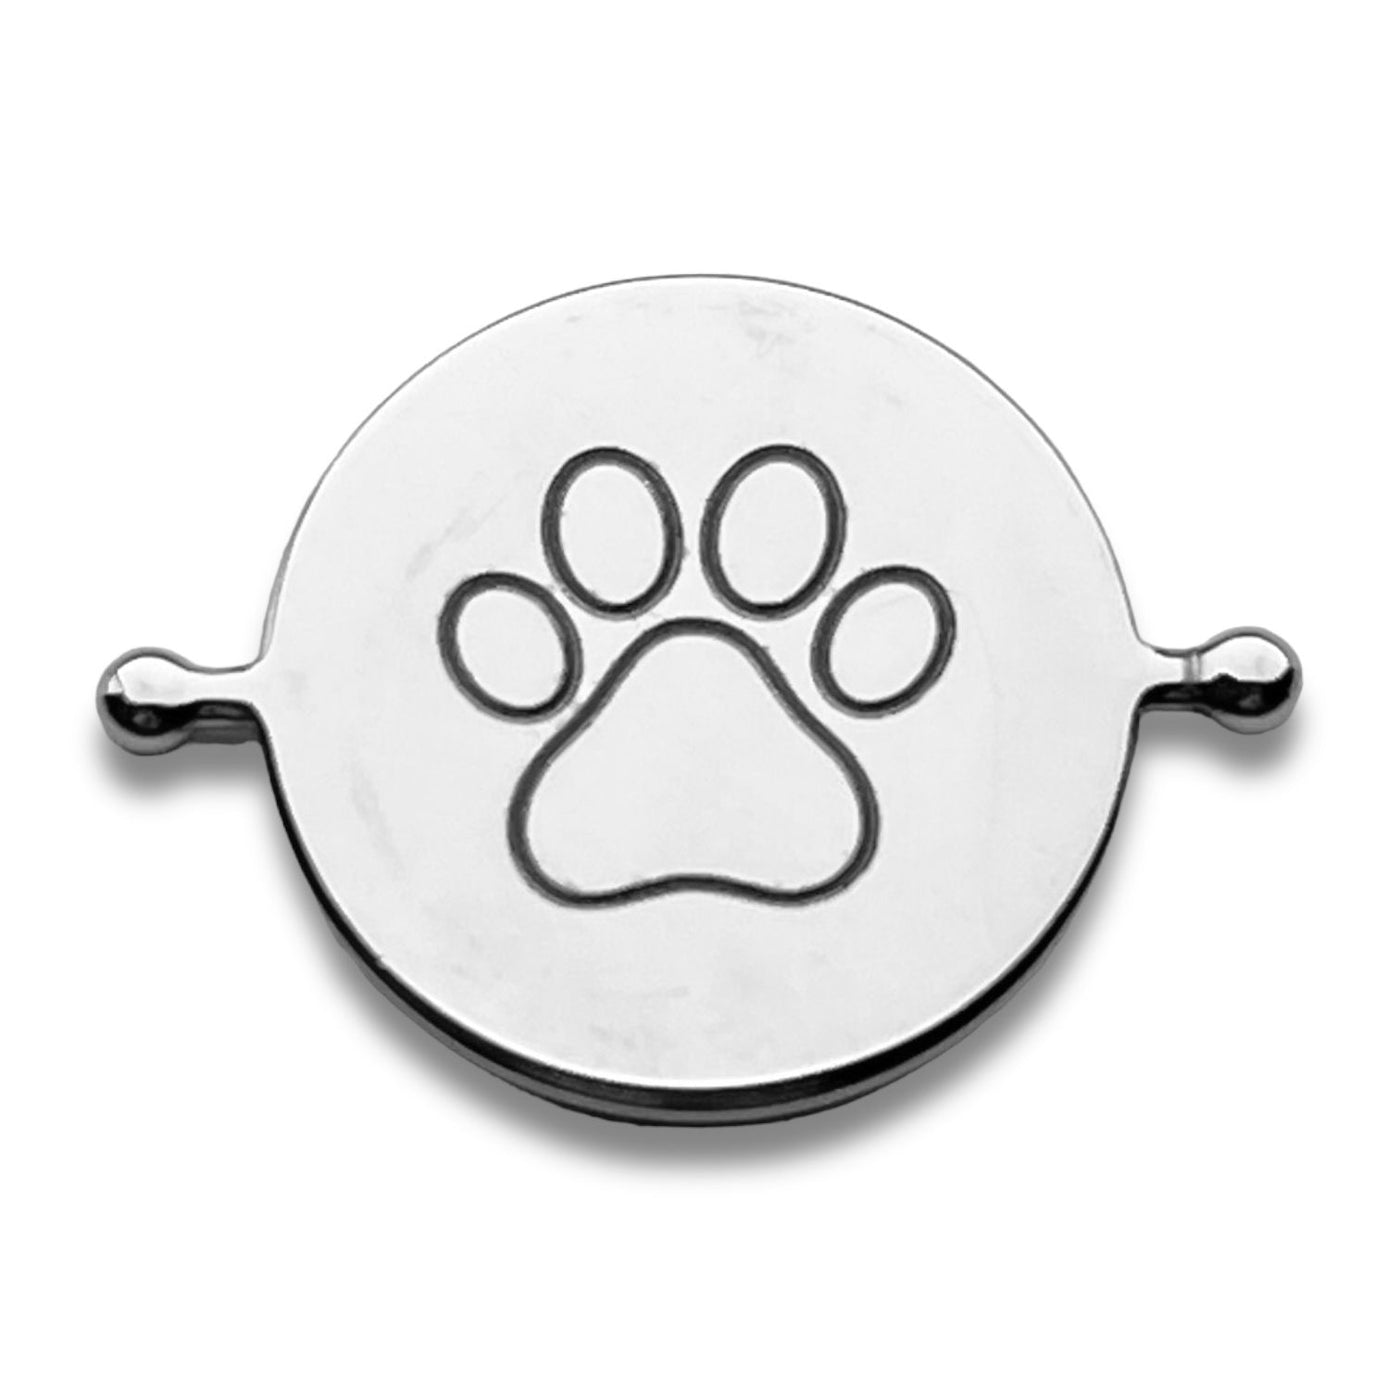 Your Pet's Name Engraved on an Element (custom pre-order)